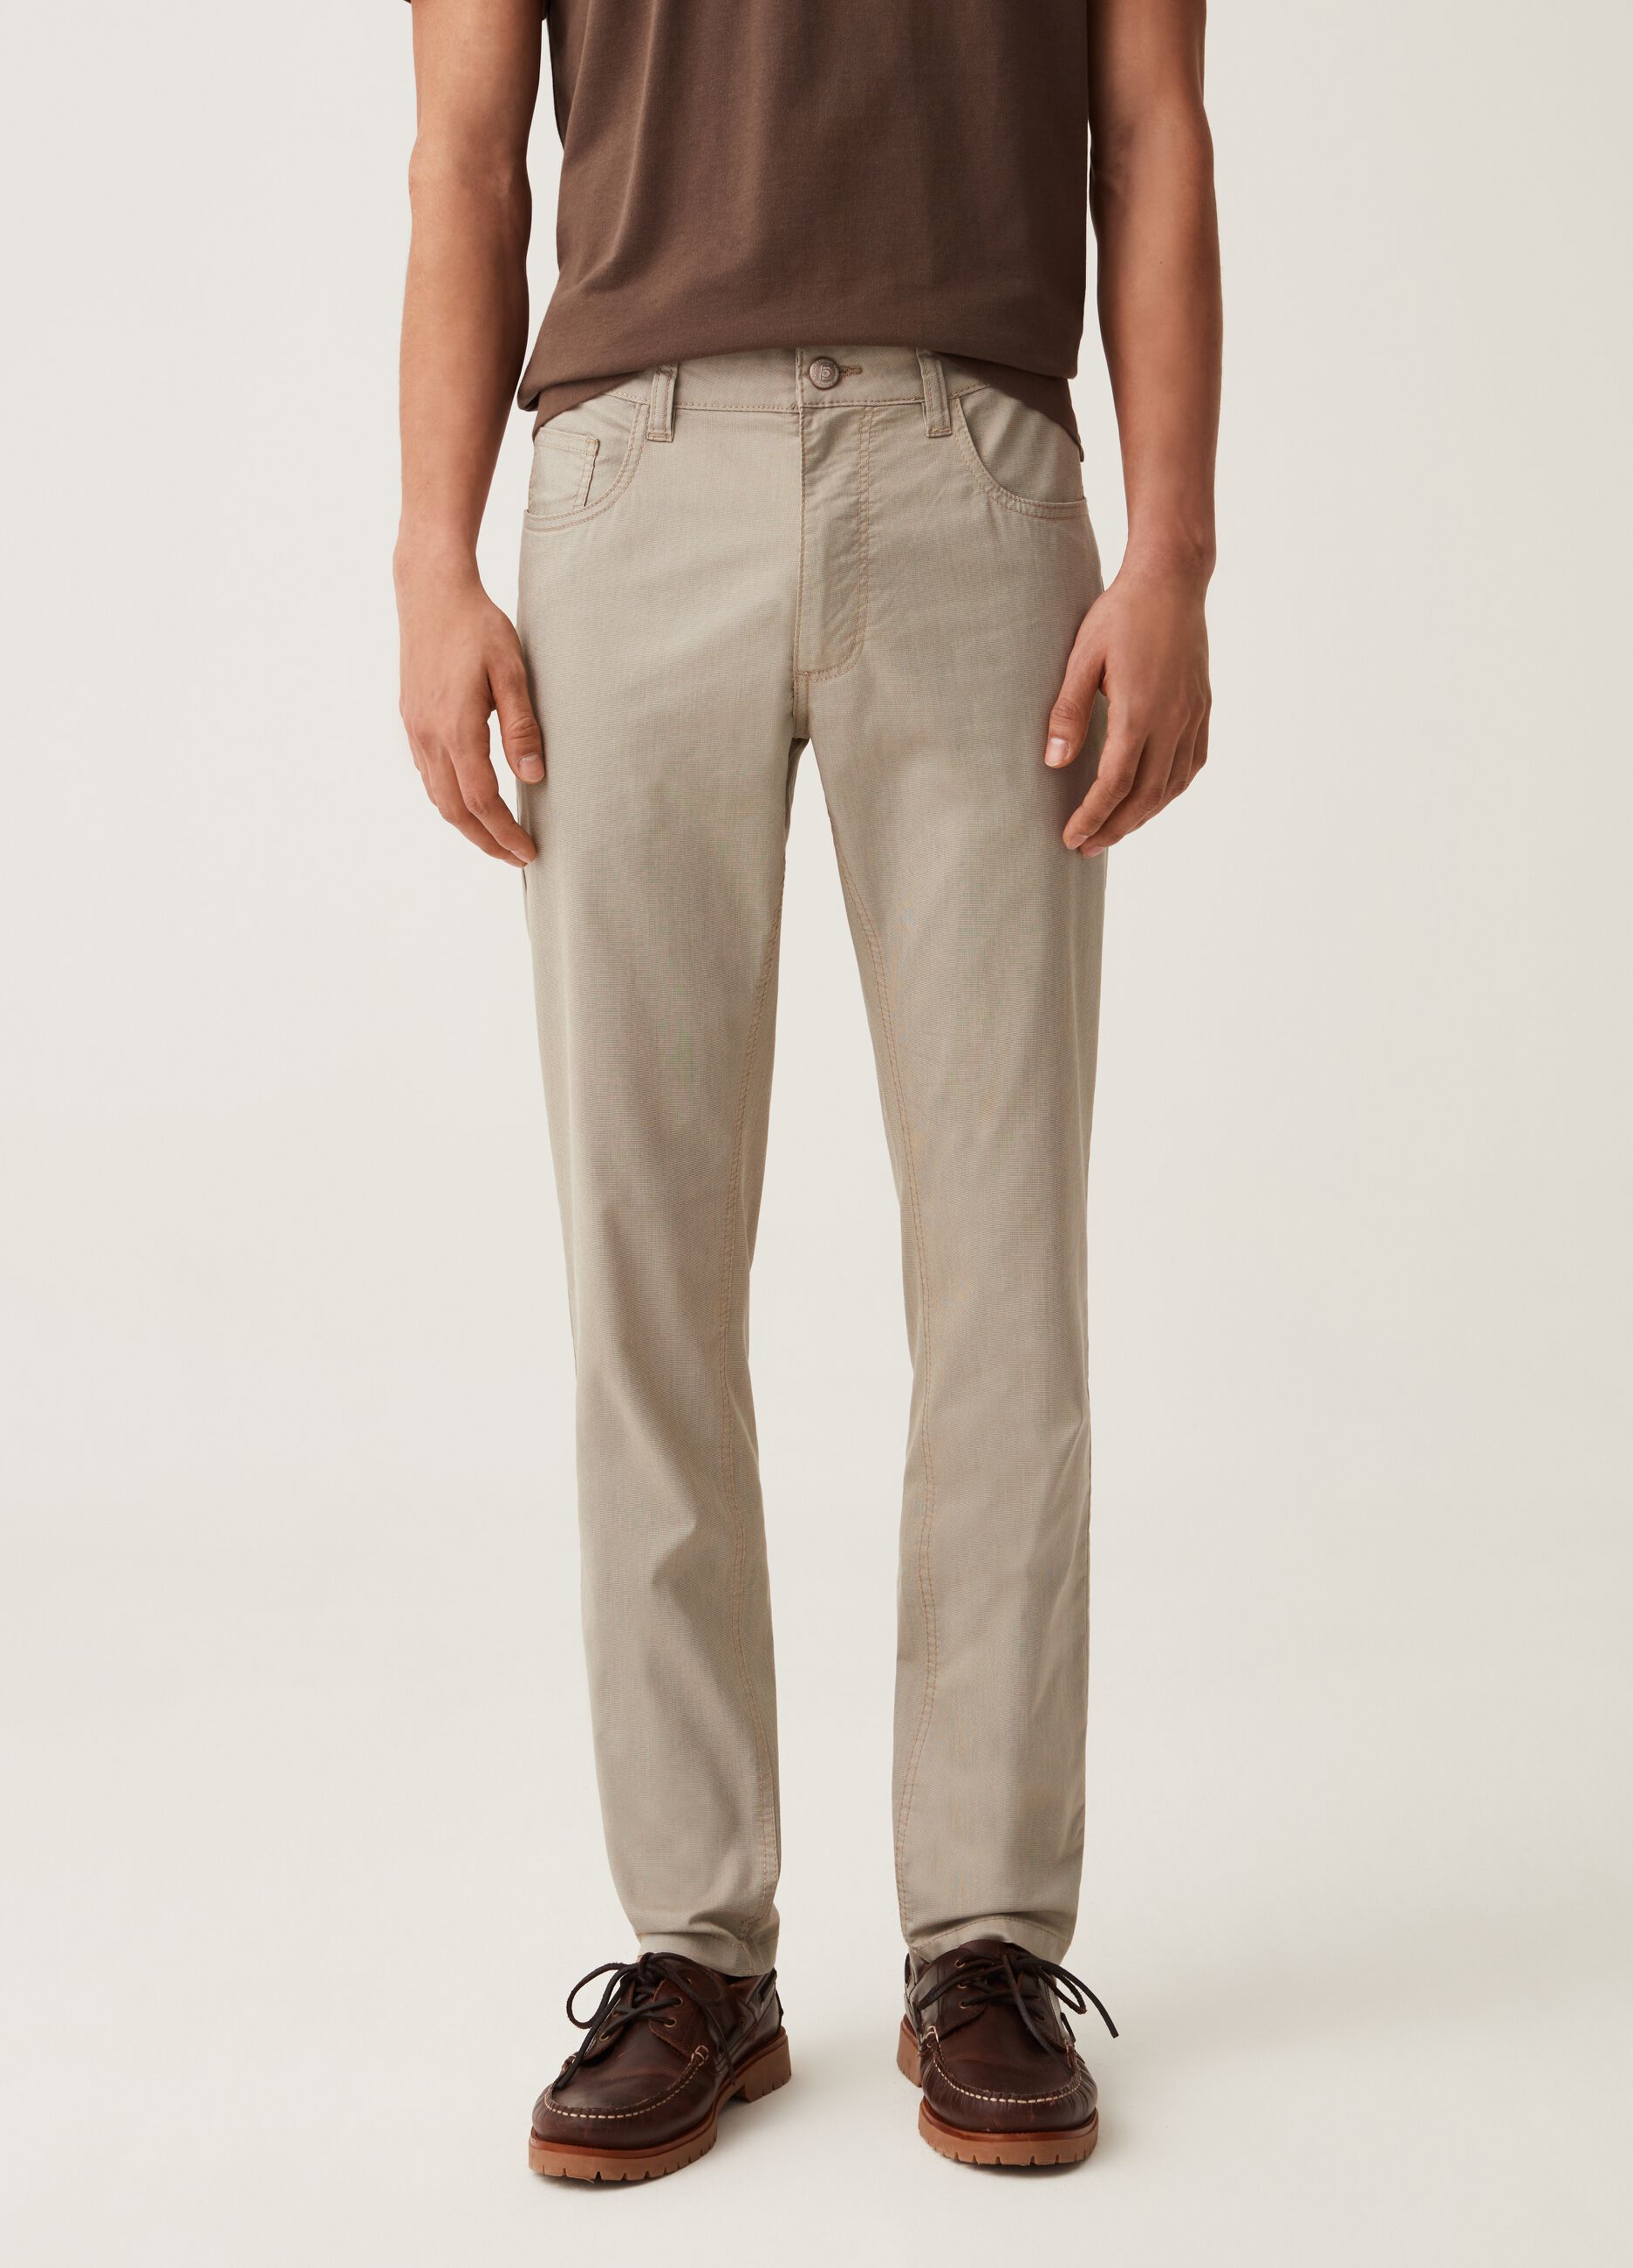 Whats the difference between 5pocket casual pants and other types of pants   Proper Cloth Help